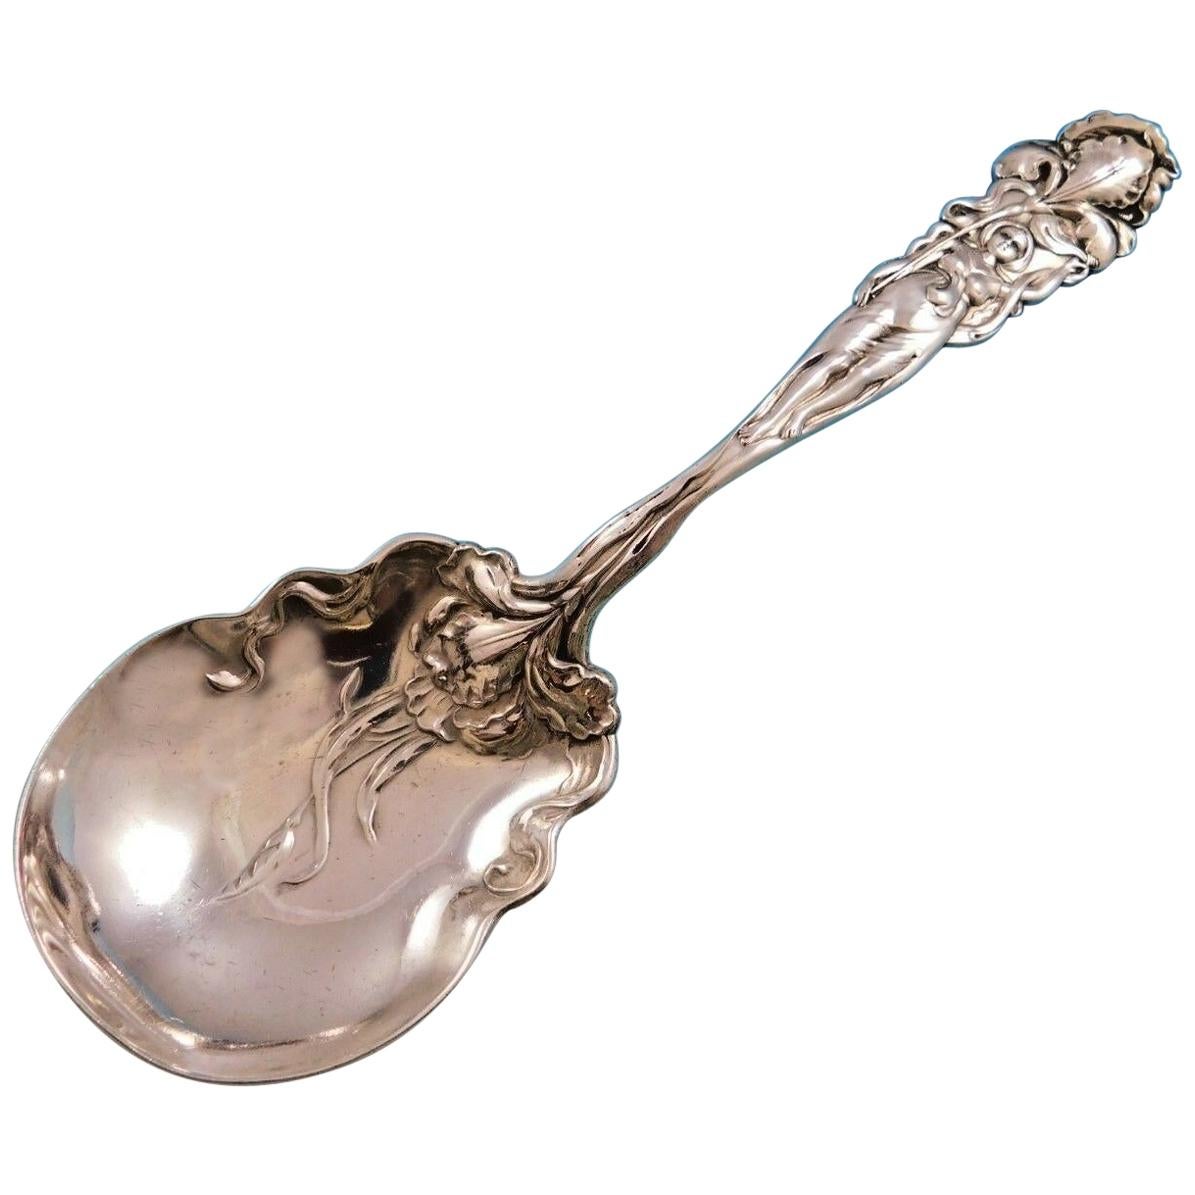 Repousse by Unknown Sterling Silver Melon Spoon Blunt Nose 6" 